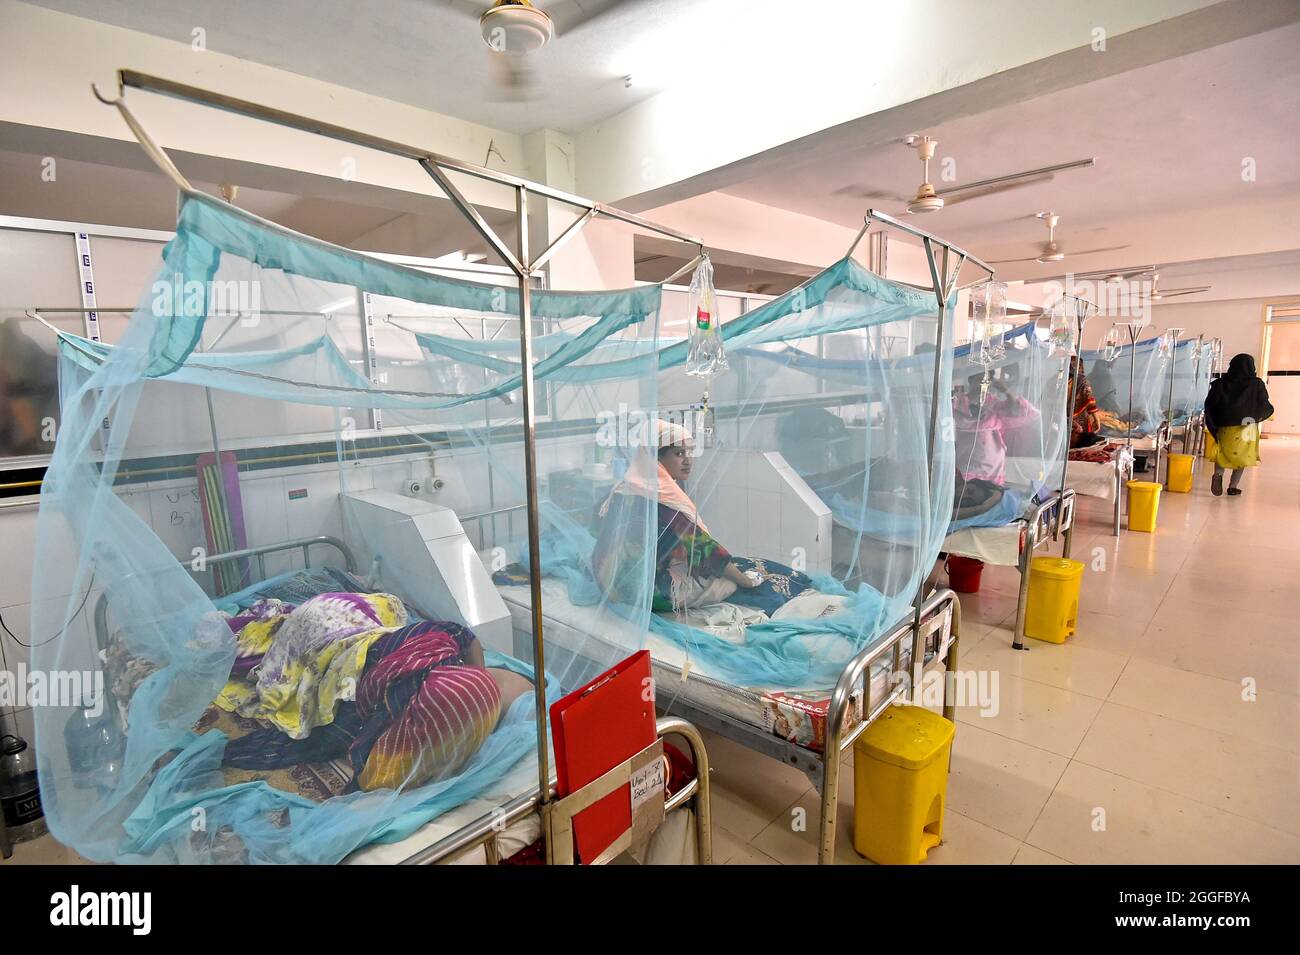 (210831) -- DHAKA, Aug. 31, 2021 (Xinhua) -- Dengue patients covered with mosquito nets receive treatment at a hospital in Dhaka, Bangladesh, Aug. 31, 2021. (Xinhua) Stock Photo